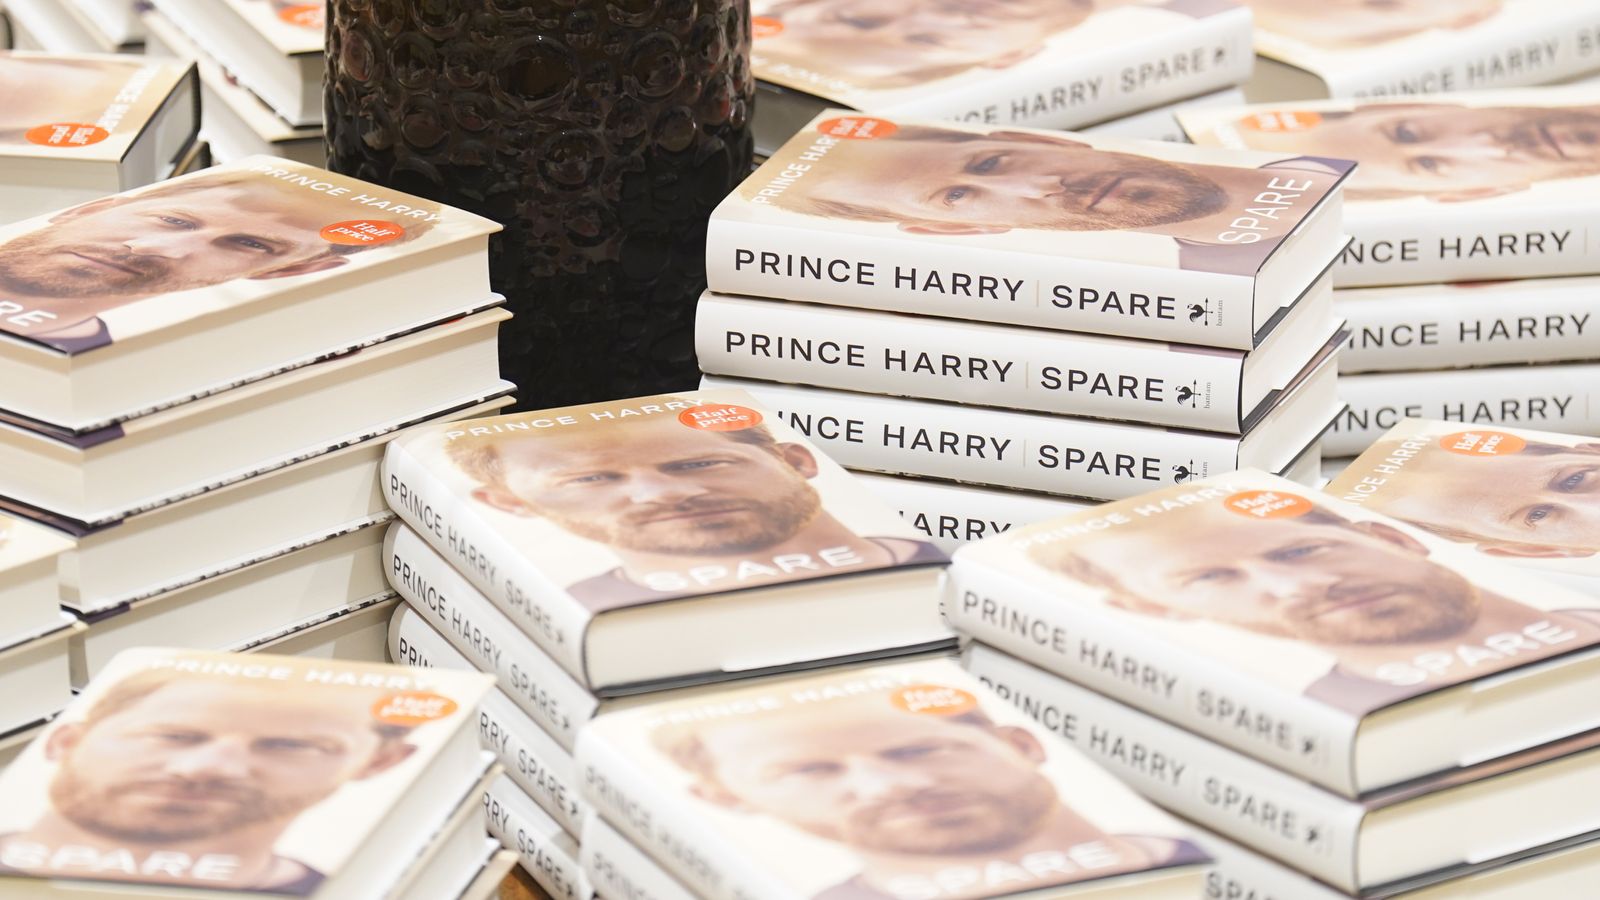 Prince Harry's book Spare is 'fastest-selling non-fiction book ever'